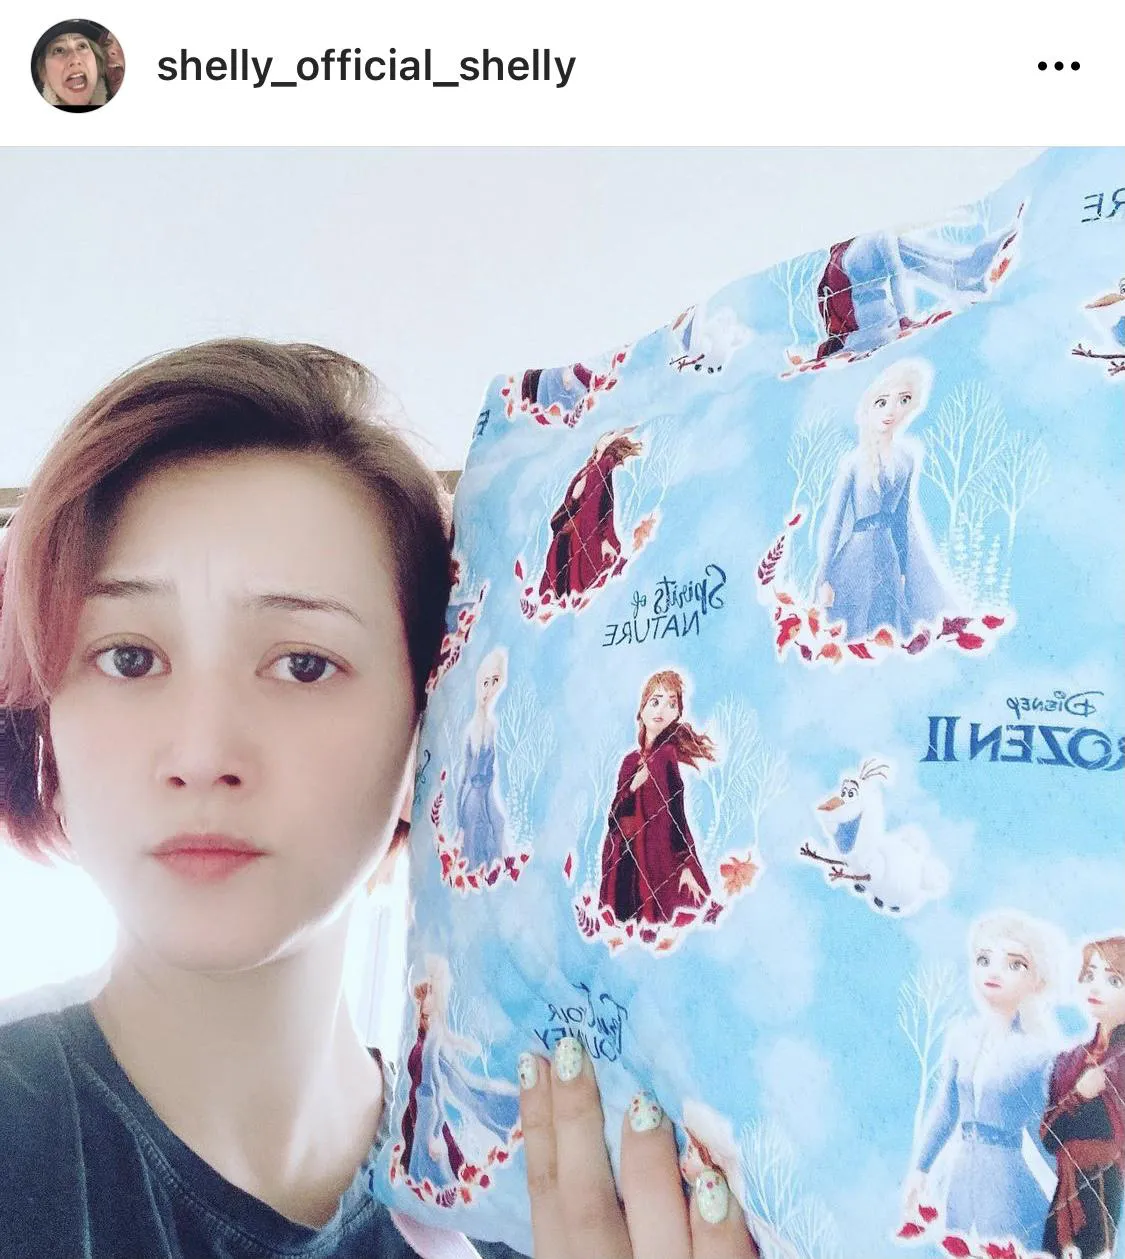 ※SHELLY 公式Instagram(shelly_official_shelly)より